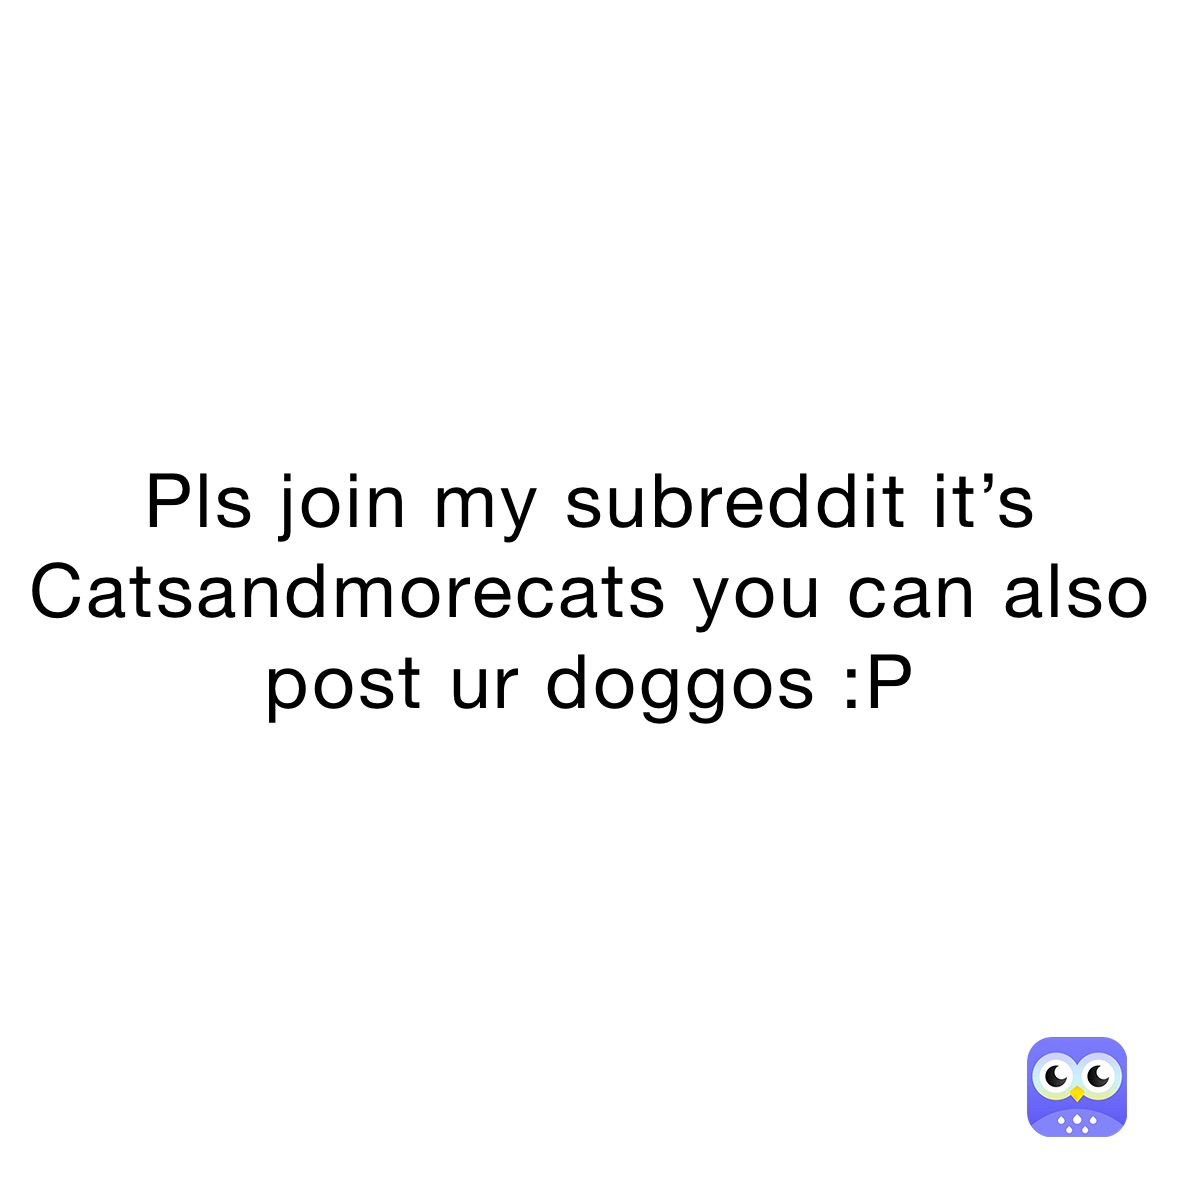 Pls join my subreddit it’s Catsandmorecats you can also post ur doggos :P